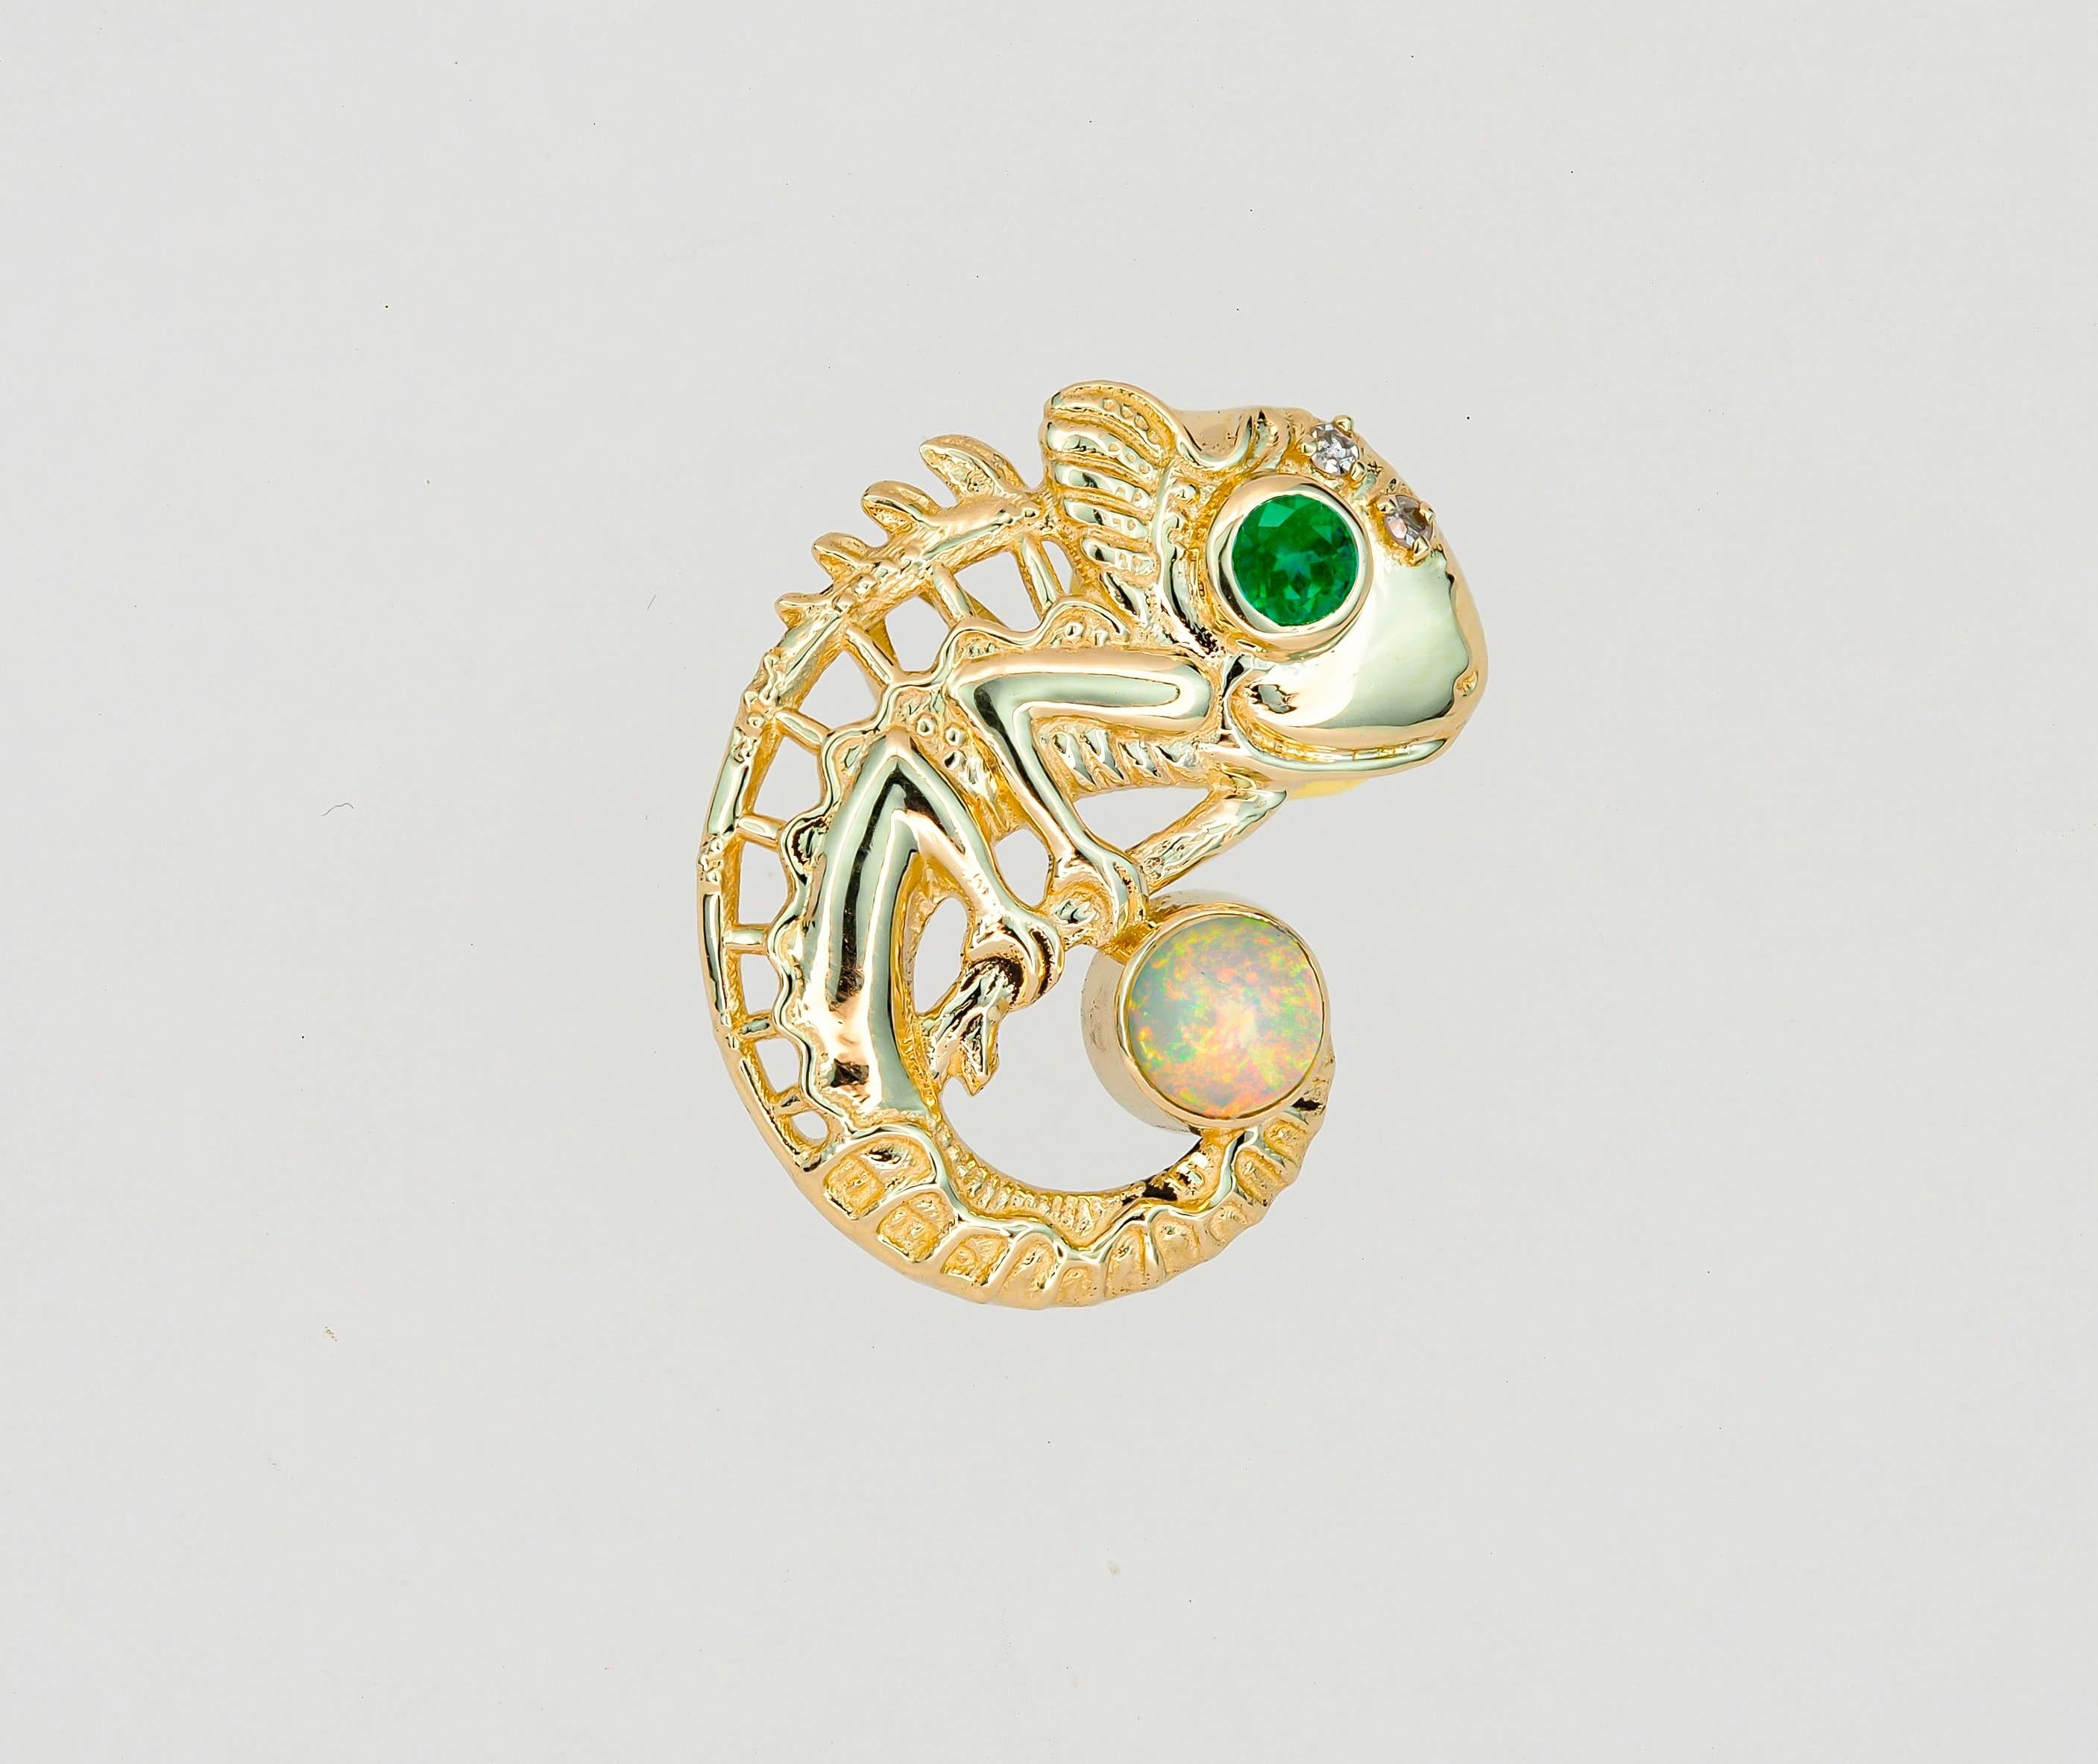 14k solid gold chameleon pendant with natural opal, emerald and diamonds.

Size: 19.3 x 13.5 mm.
Total weight 2.00 g.

Natural gemstones :
Opal: round cabochon shape, orange-yellow with color flash on pen light, transparent, 0.50 ct.
Emerald: round